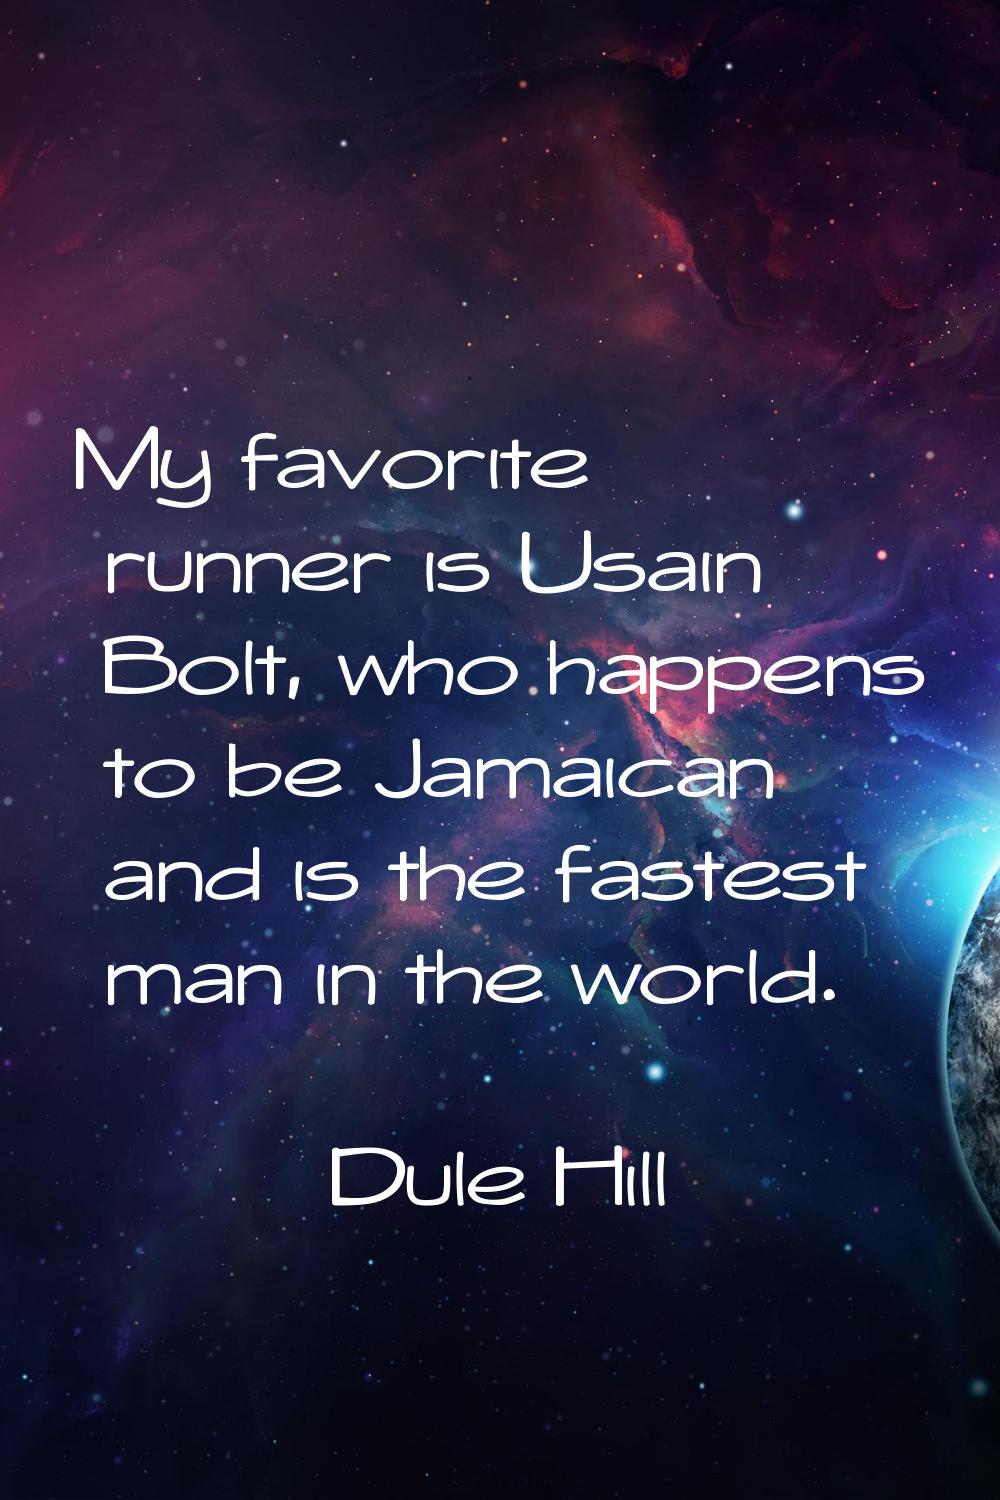 My favorite runner is Usain Bolt, who happens to be Jamaican and is the fastest man in the world.